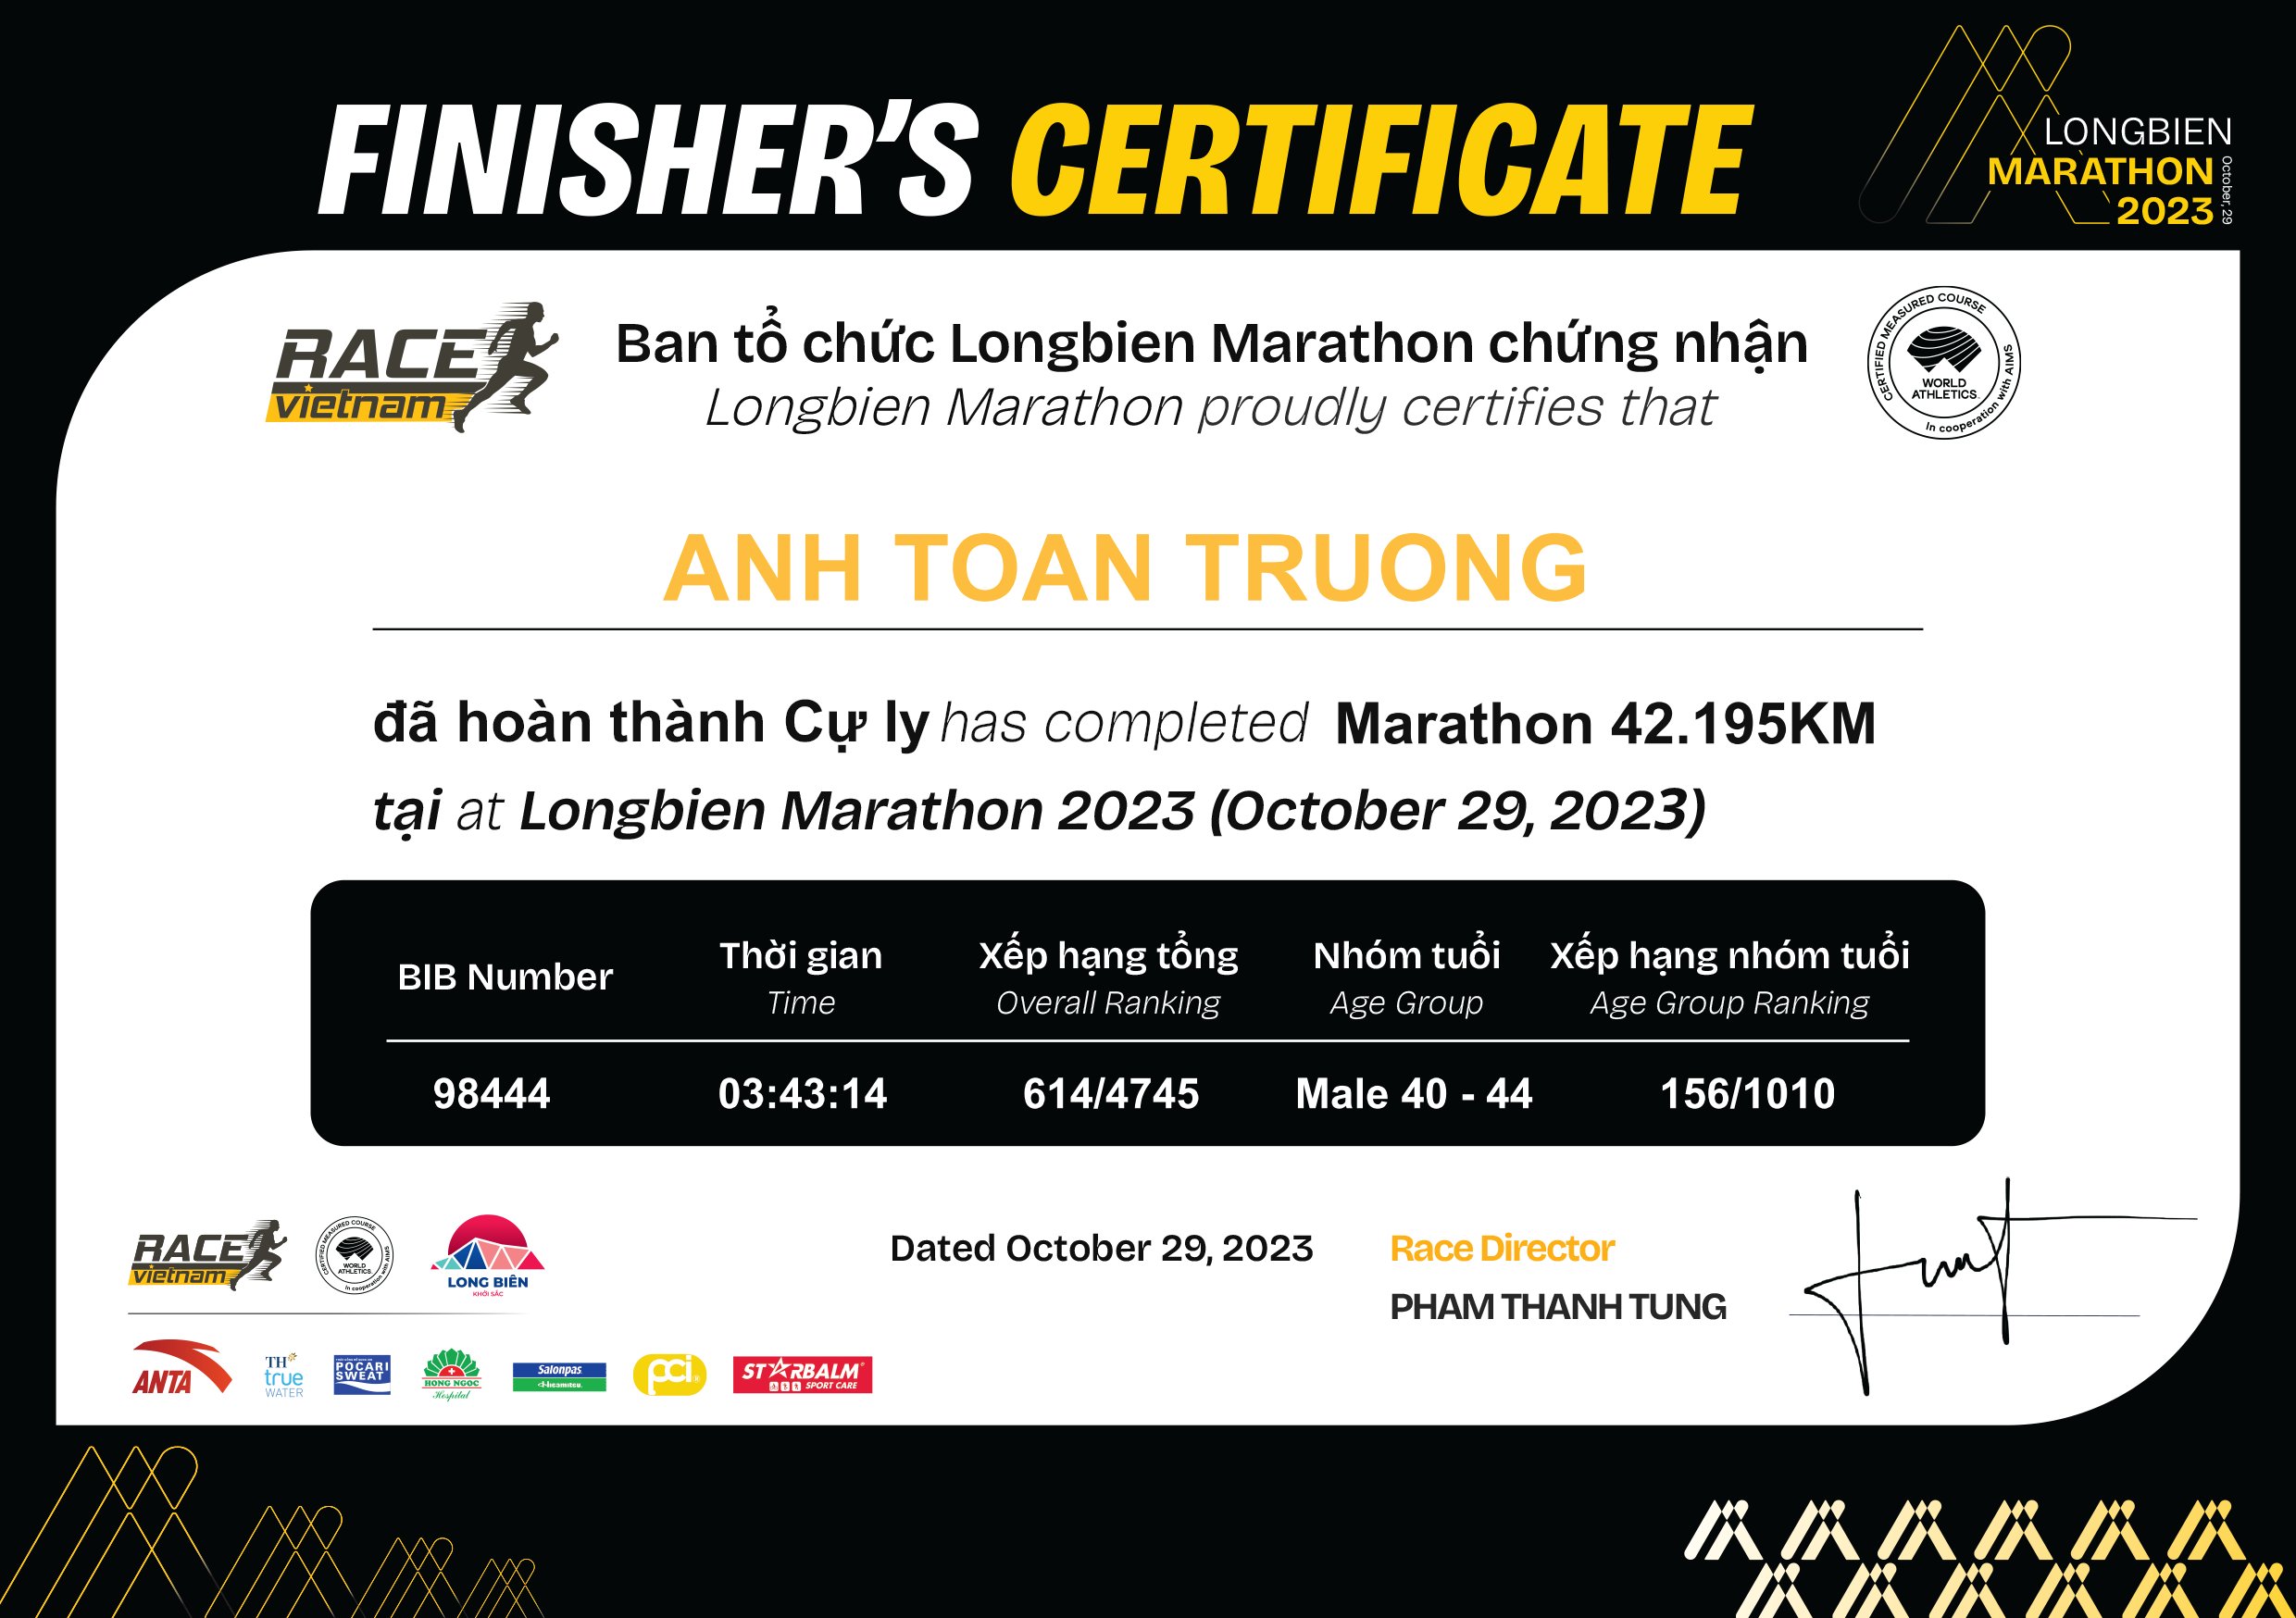 98444 - Anh Toan Truong